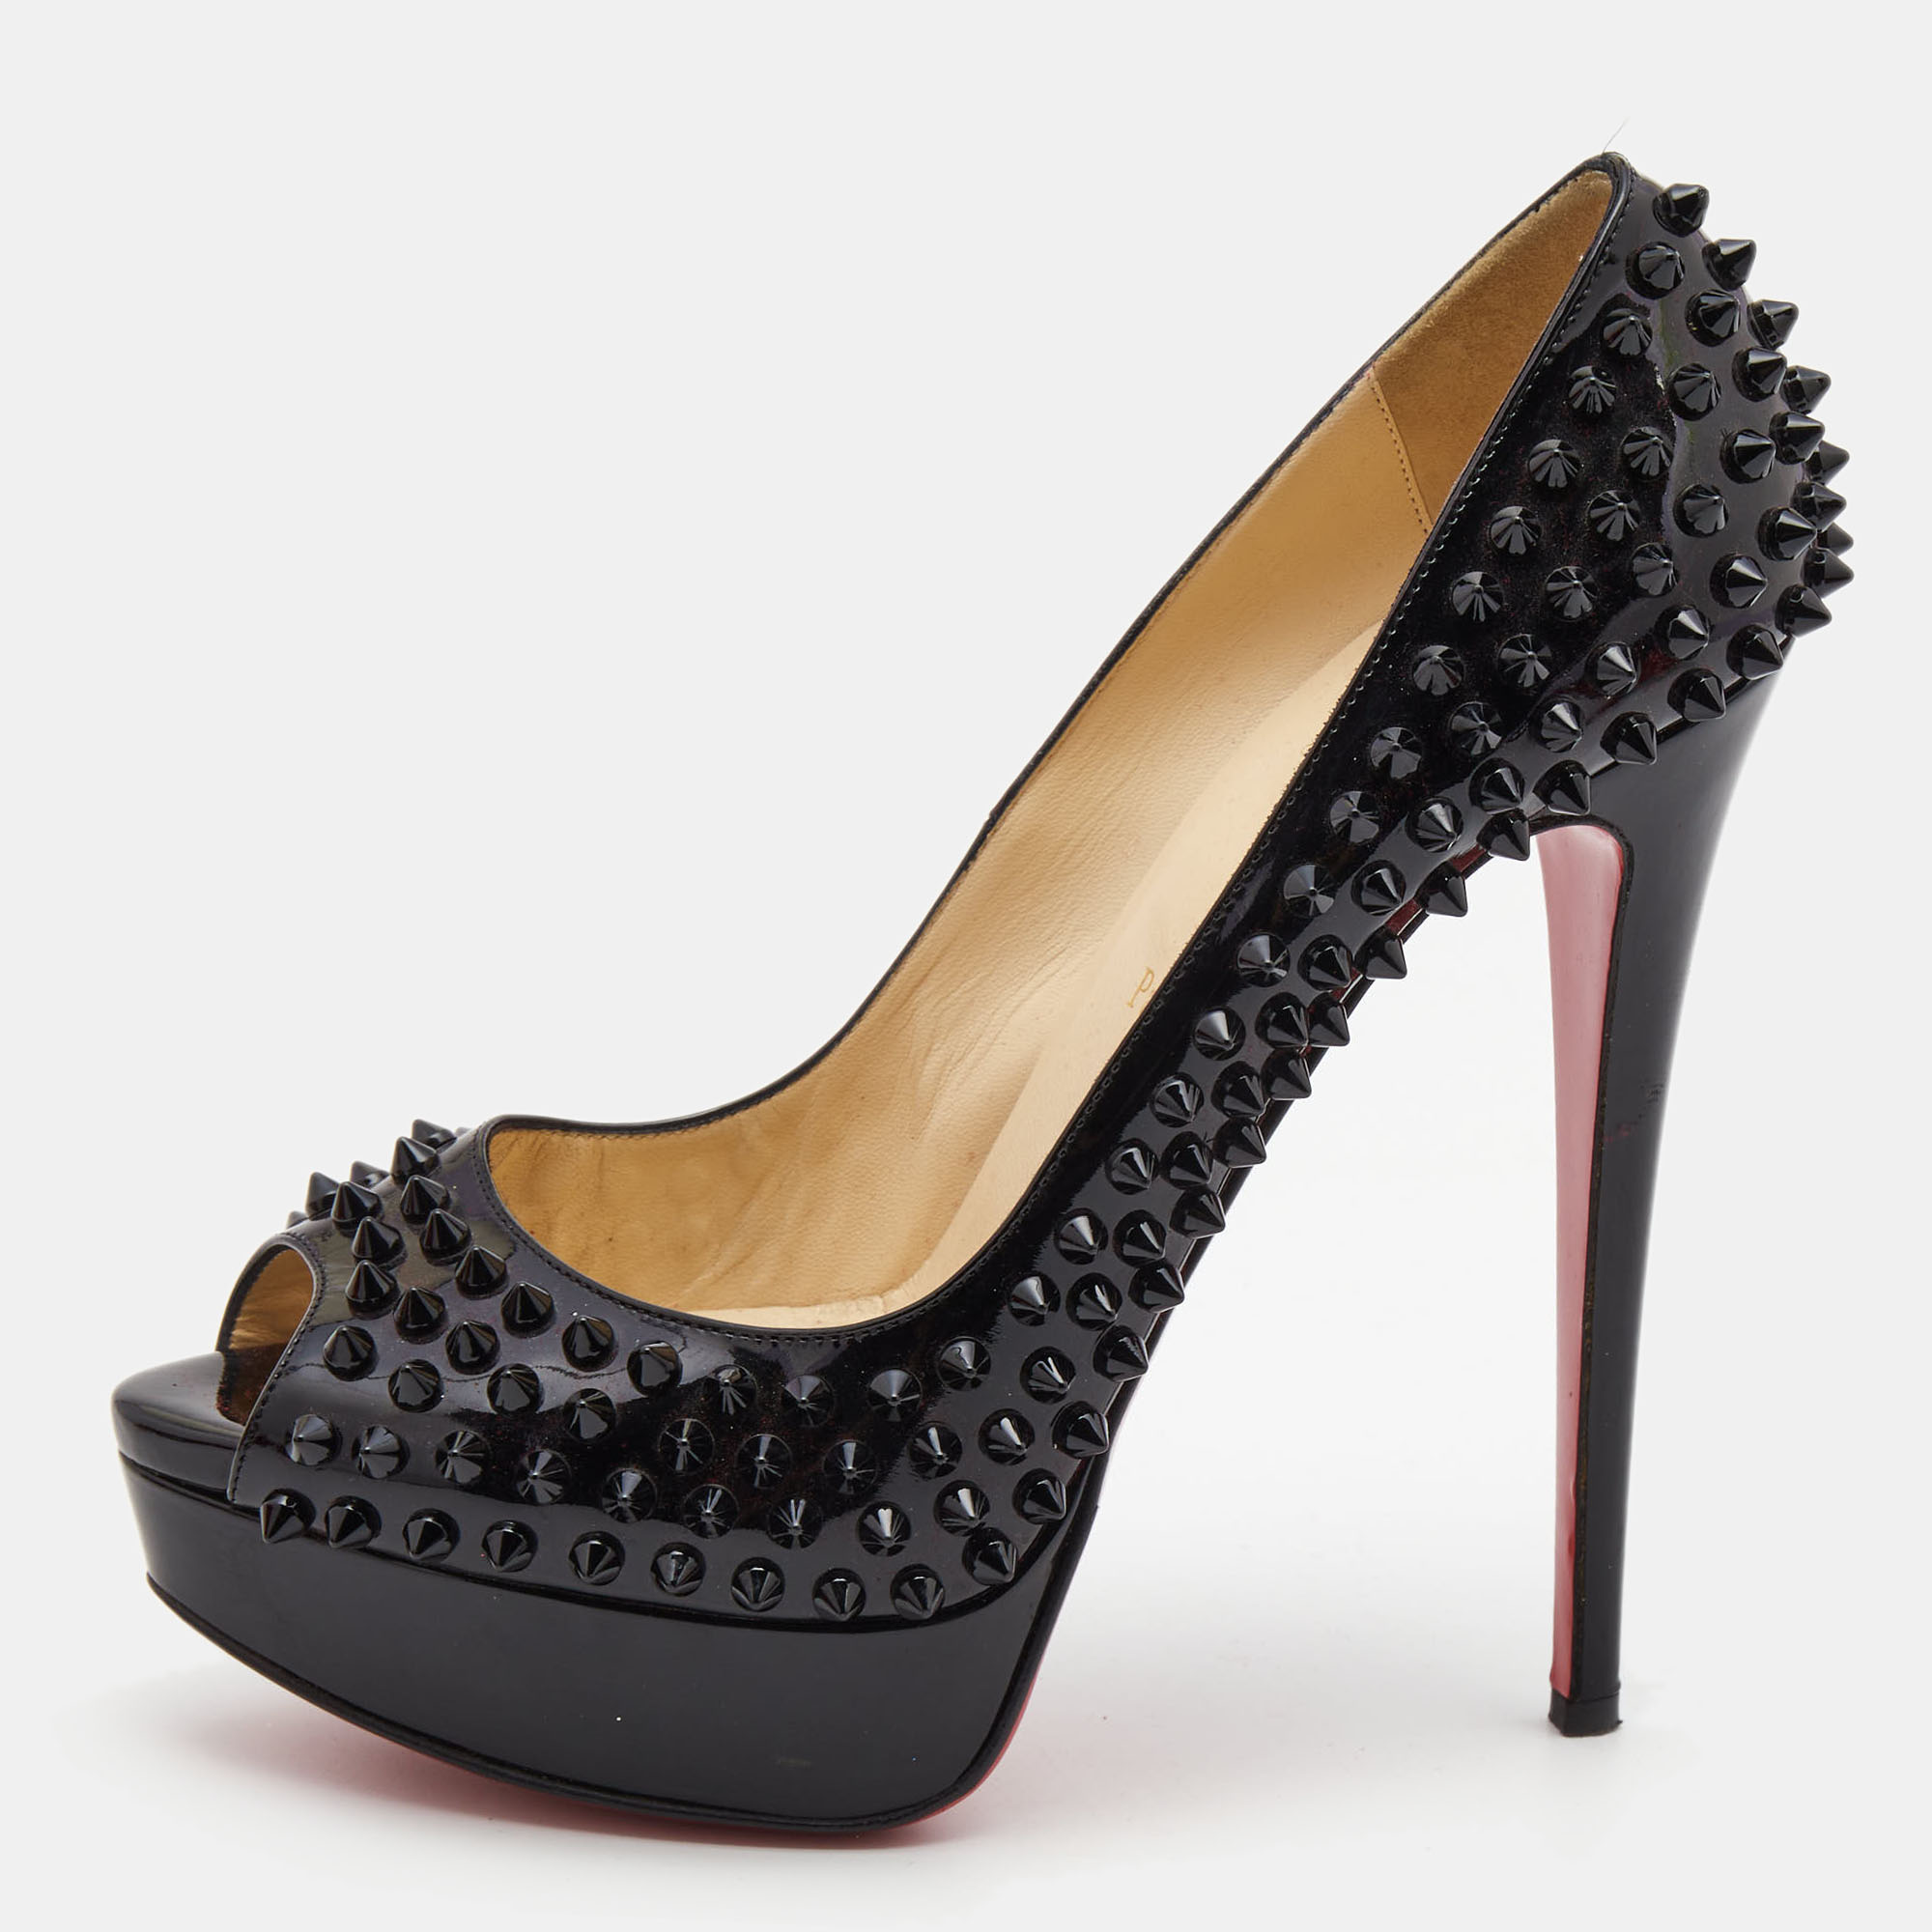 Stand out from the crowd with this pair of Christian Louboutin pumps that exude high fashion with class. Crafted from patent leather this is a creation from their Lady Peep collection. It features a classy black shade with peep toe silhouette and chic spike detailing. Completed with leather insoles stiletto heels and signature red lacquered soles these shoes are a must have.